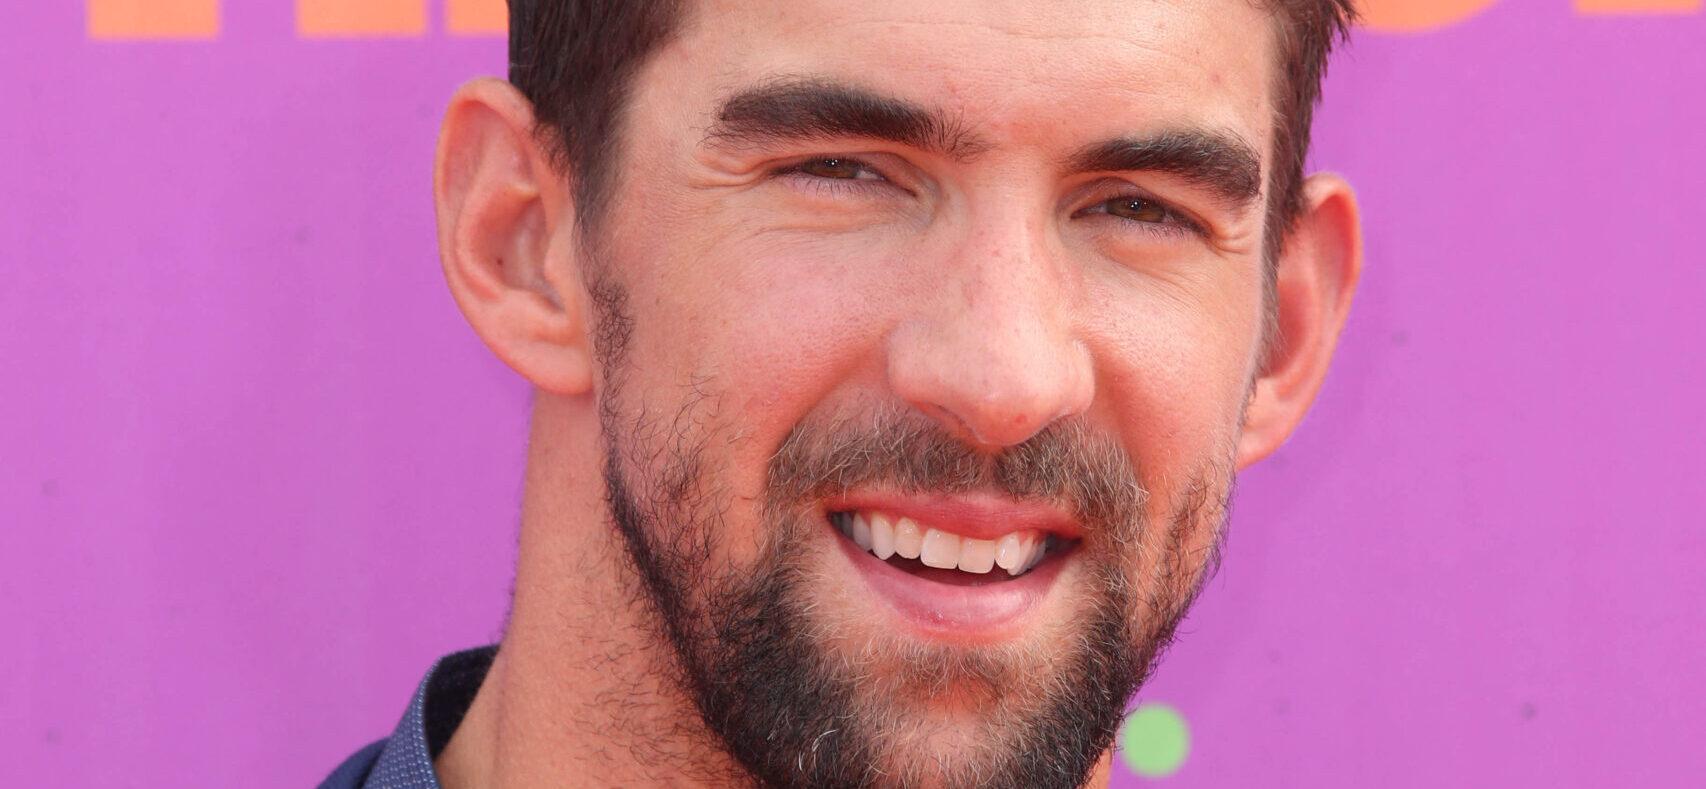 Michael Phelps arrives at the Nickelodeon Kids' Choice Sports Awards in Los Angeles